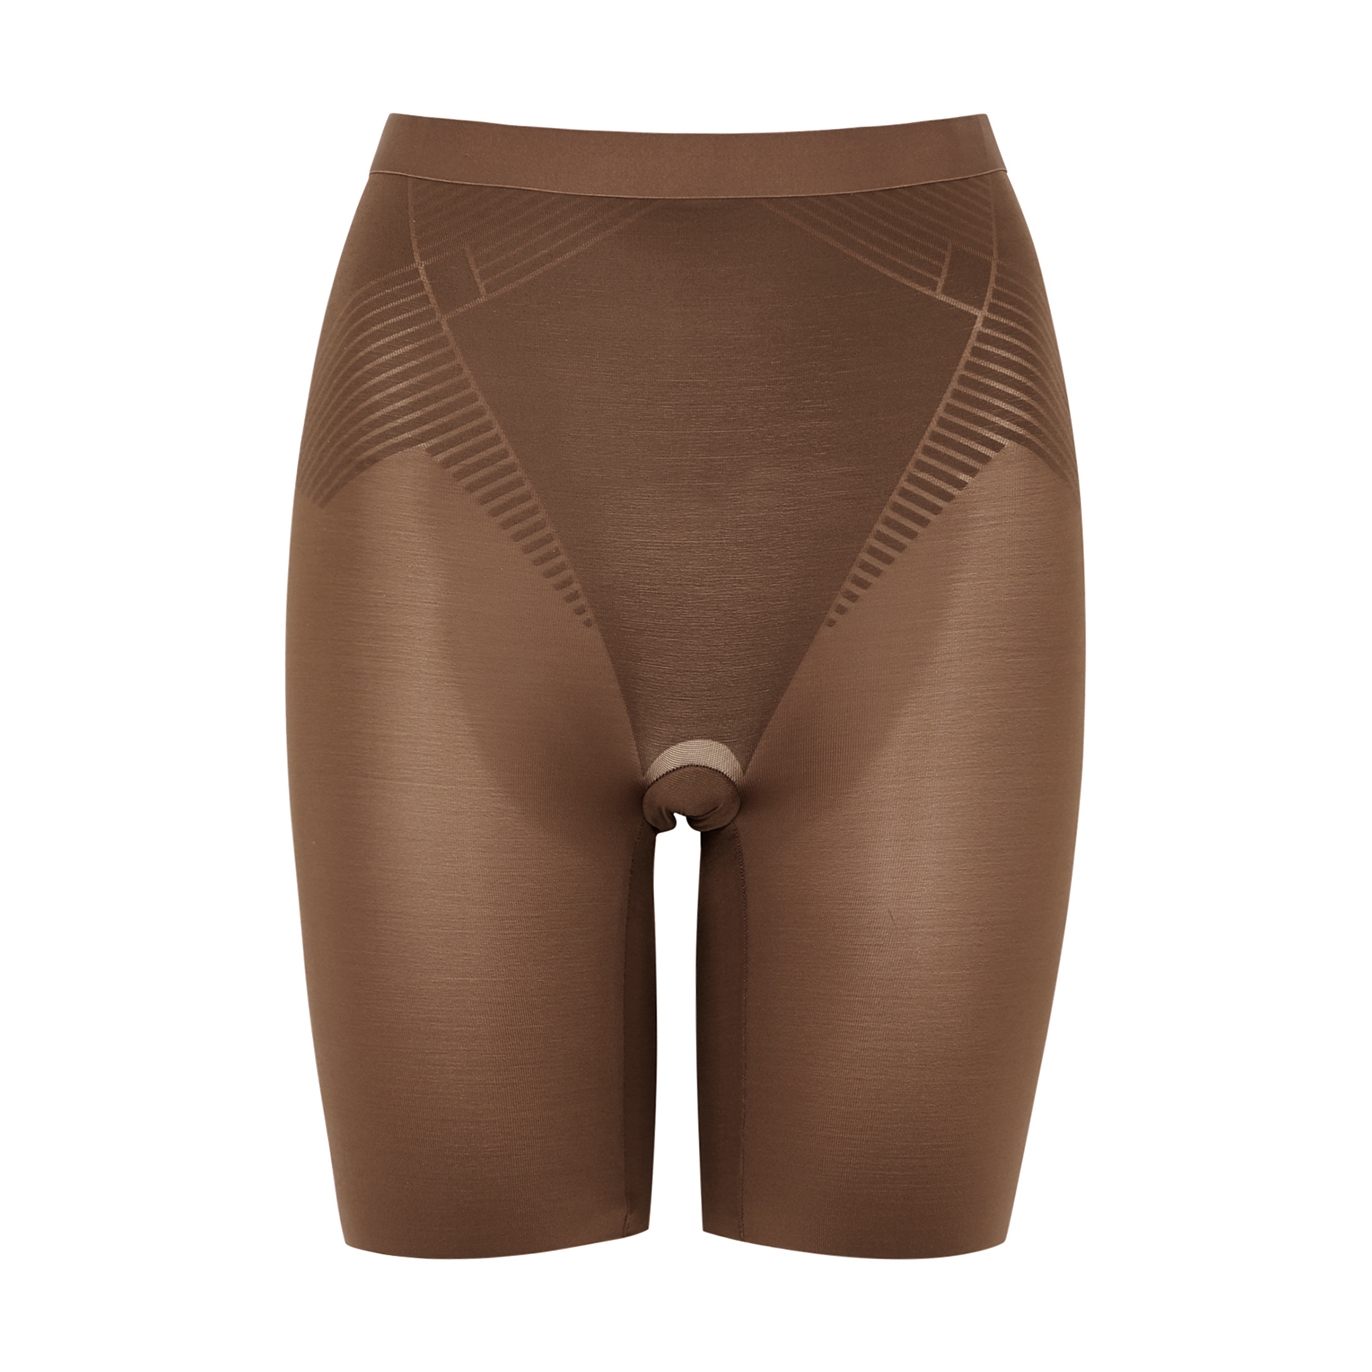 Spanx Thinstincts 2.0 Mid-thigh Shorts - Brown - XS